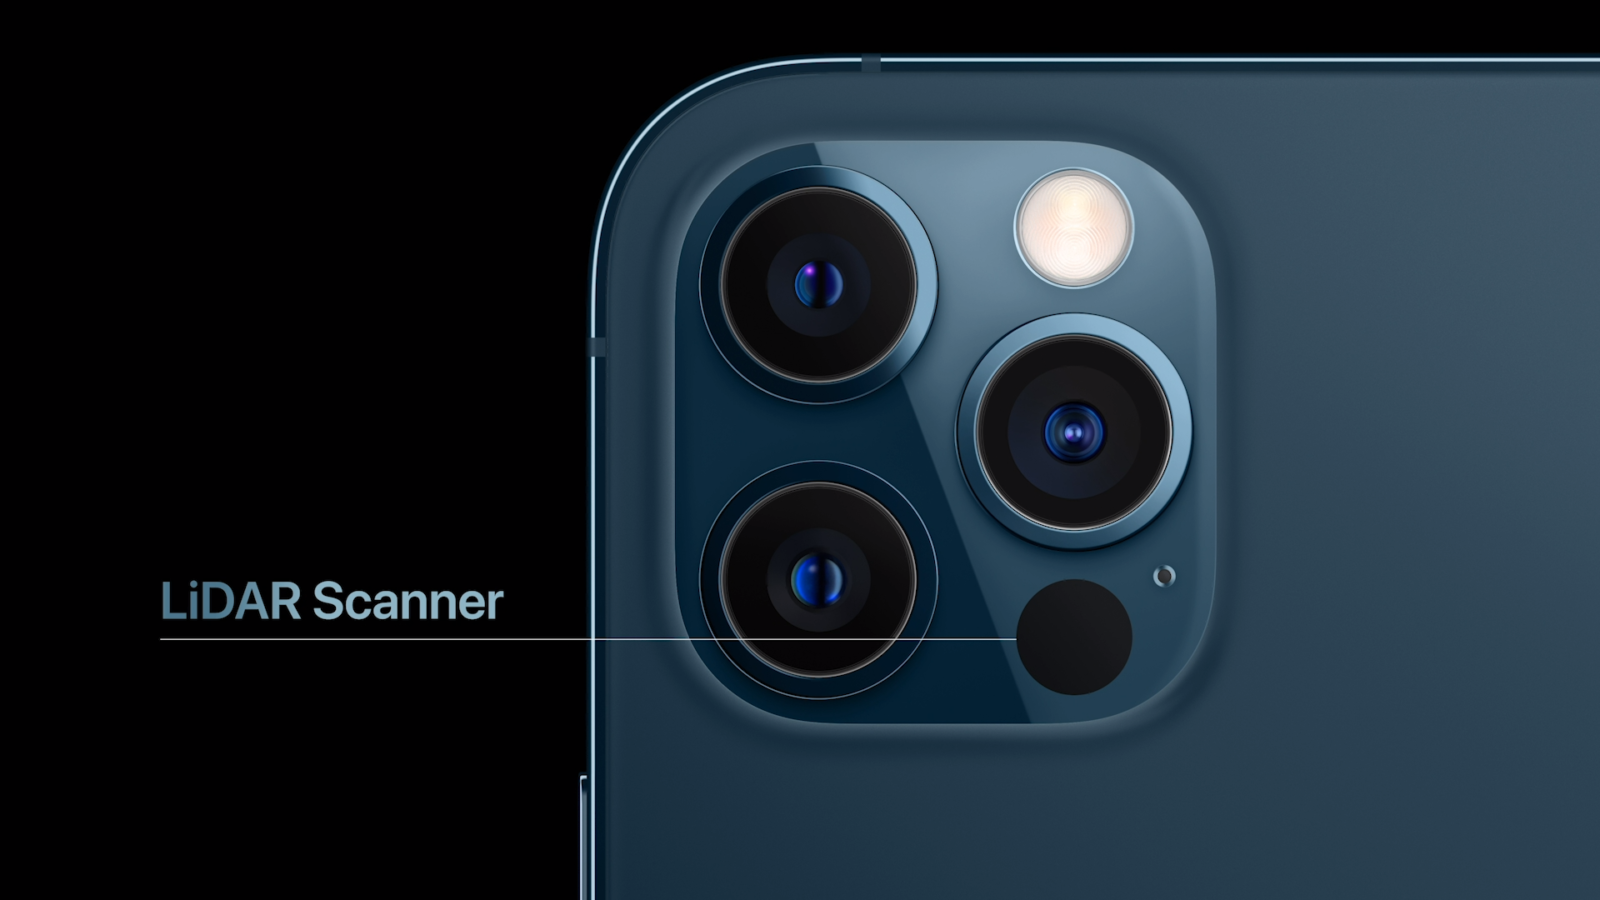 iPhone 12 Pro and Pro Max Feature a LiDAR Scanner - Focus Six Times